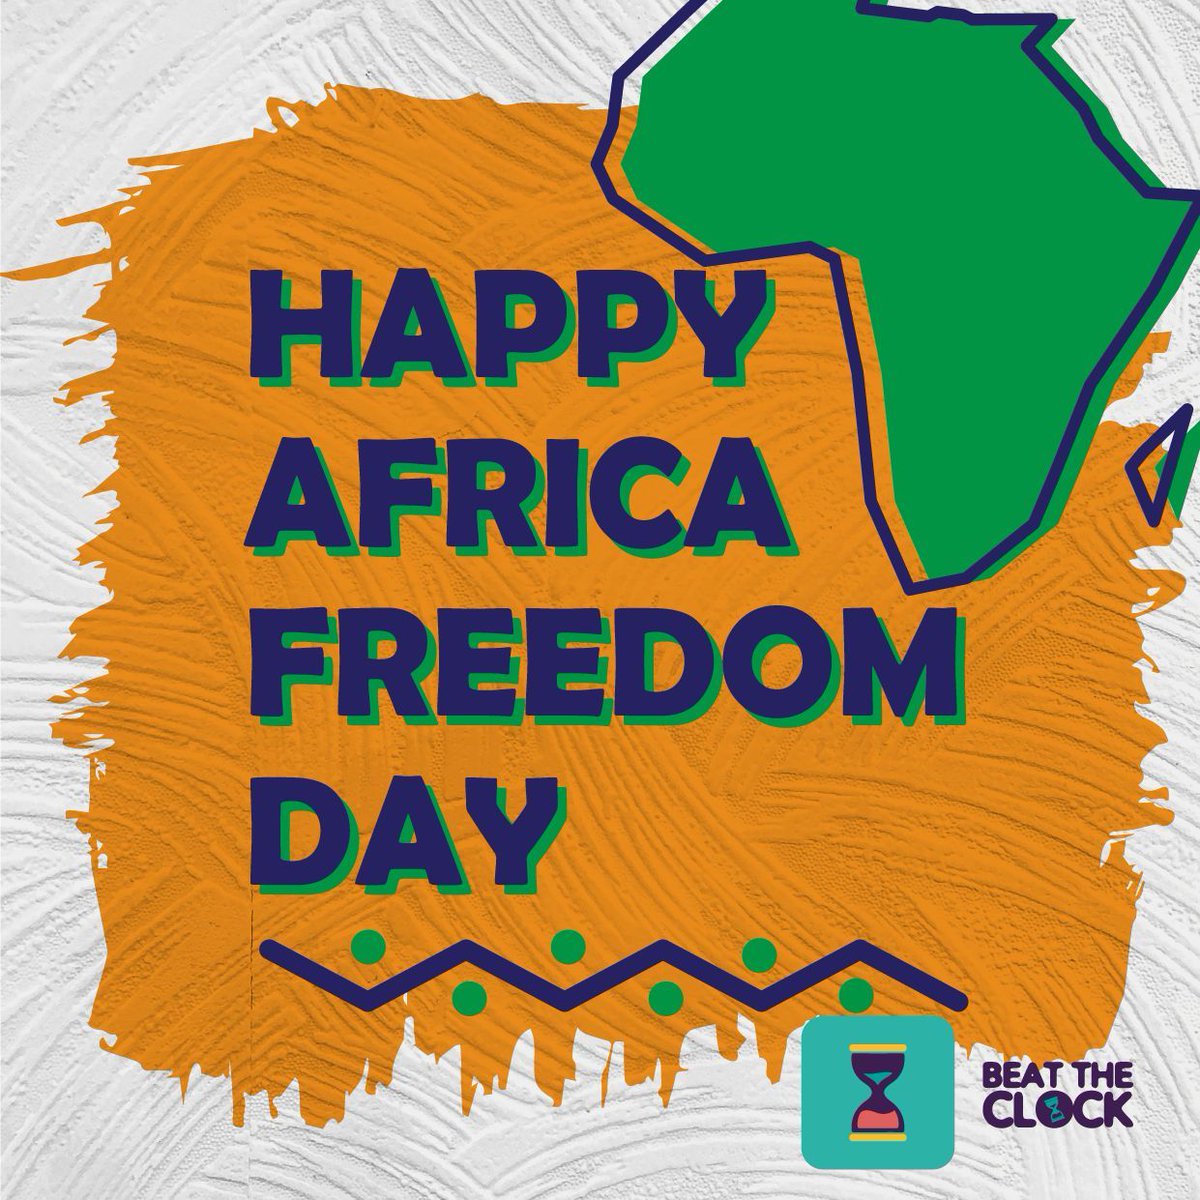 Happy Africa Freedom Day! 🎉 

Celebrate with Beat The Clock, the ultimate trivia game! Perfect for friends and family fun. 🧠⏰ Download now and make today unforgettable! 📲buff.ly/49Yqb1H 

#AfricaFreedomDay #BeatTheClock